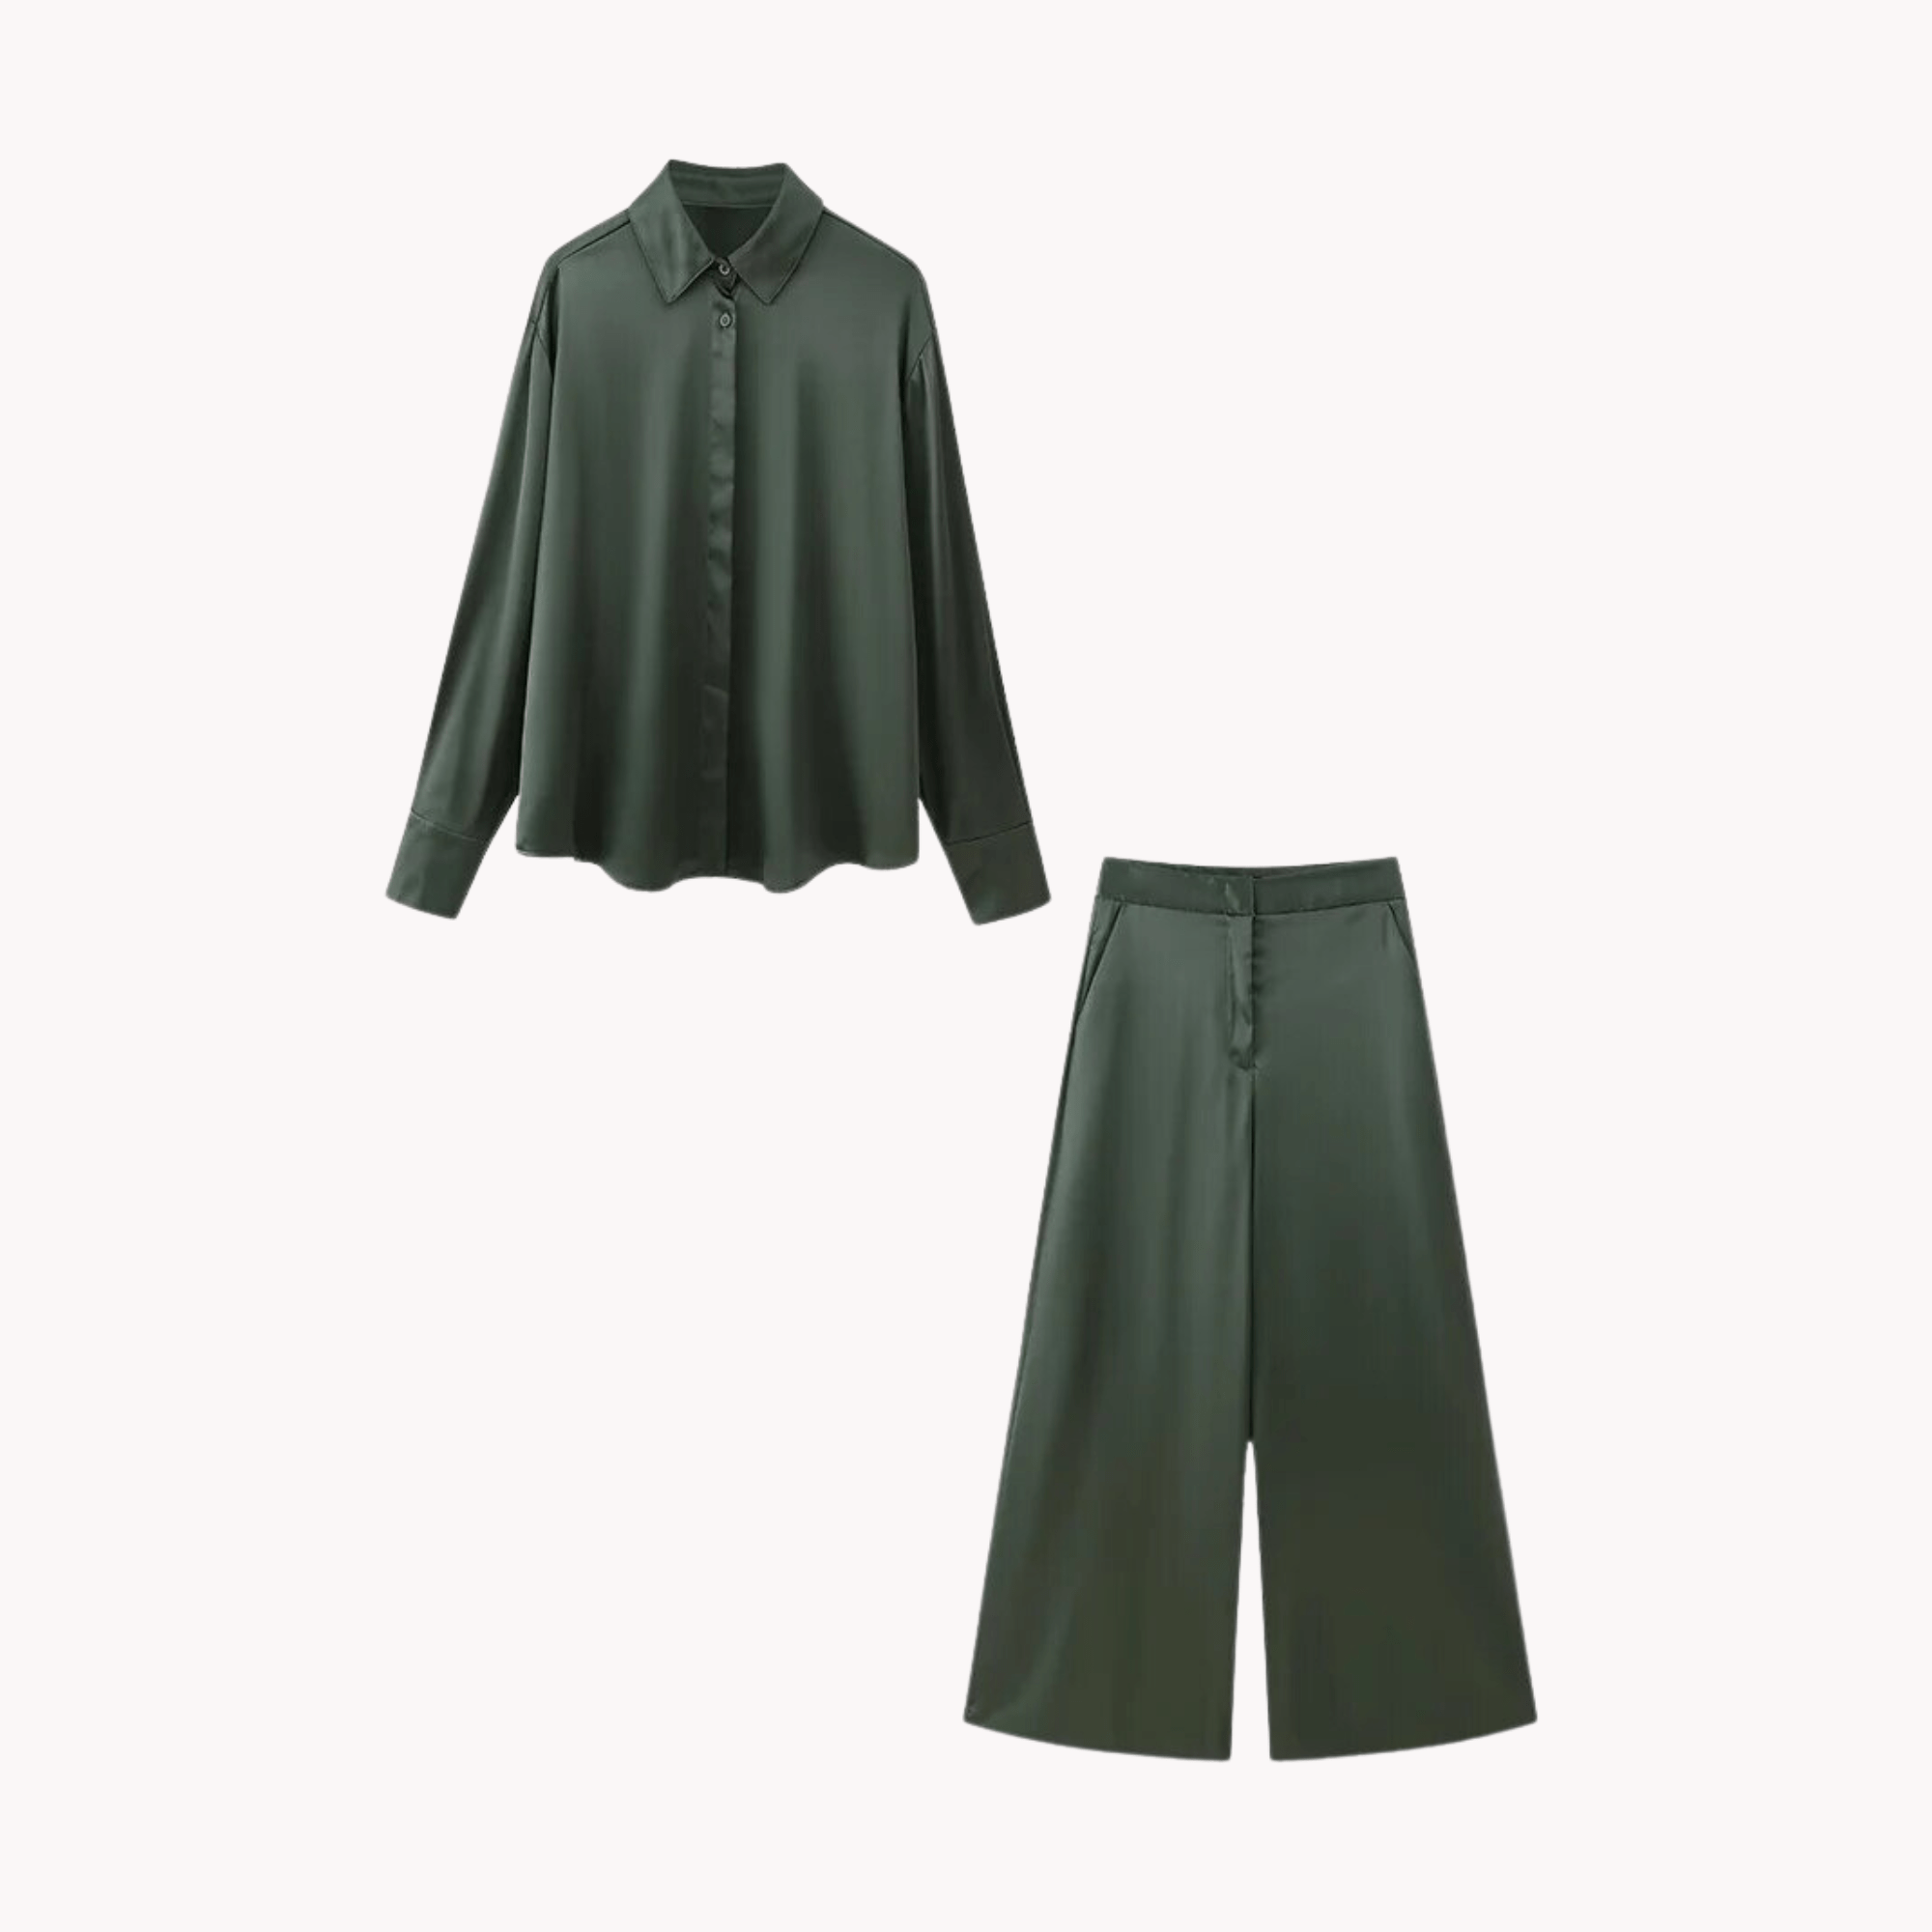 Green Classic Top and Pants Set - Kelly Obi New York